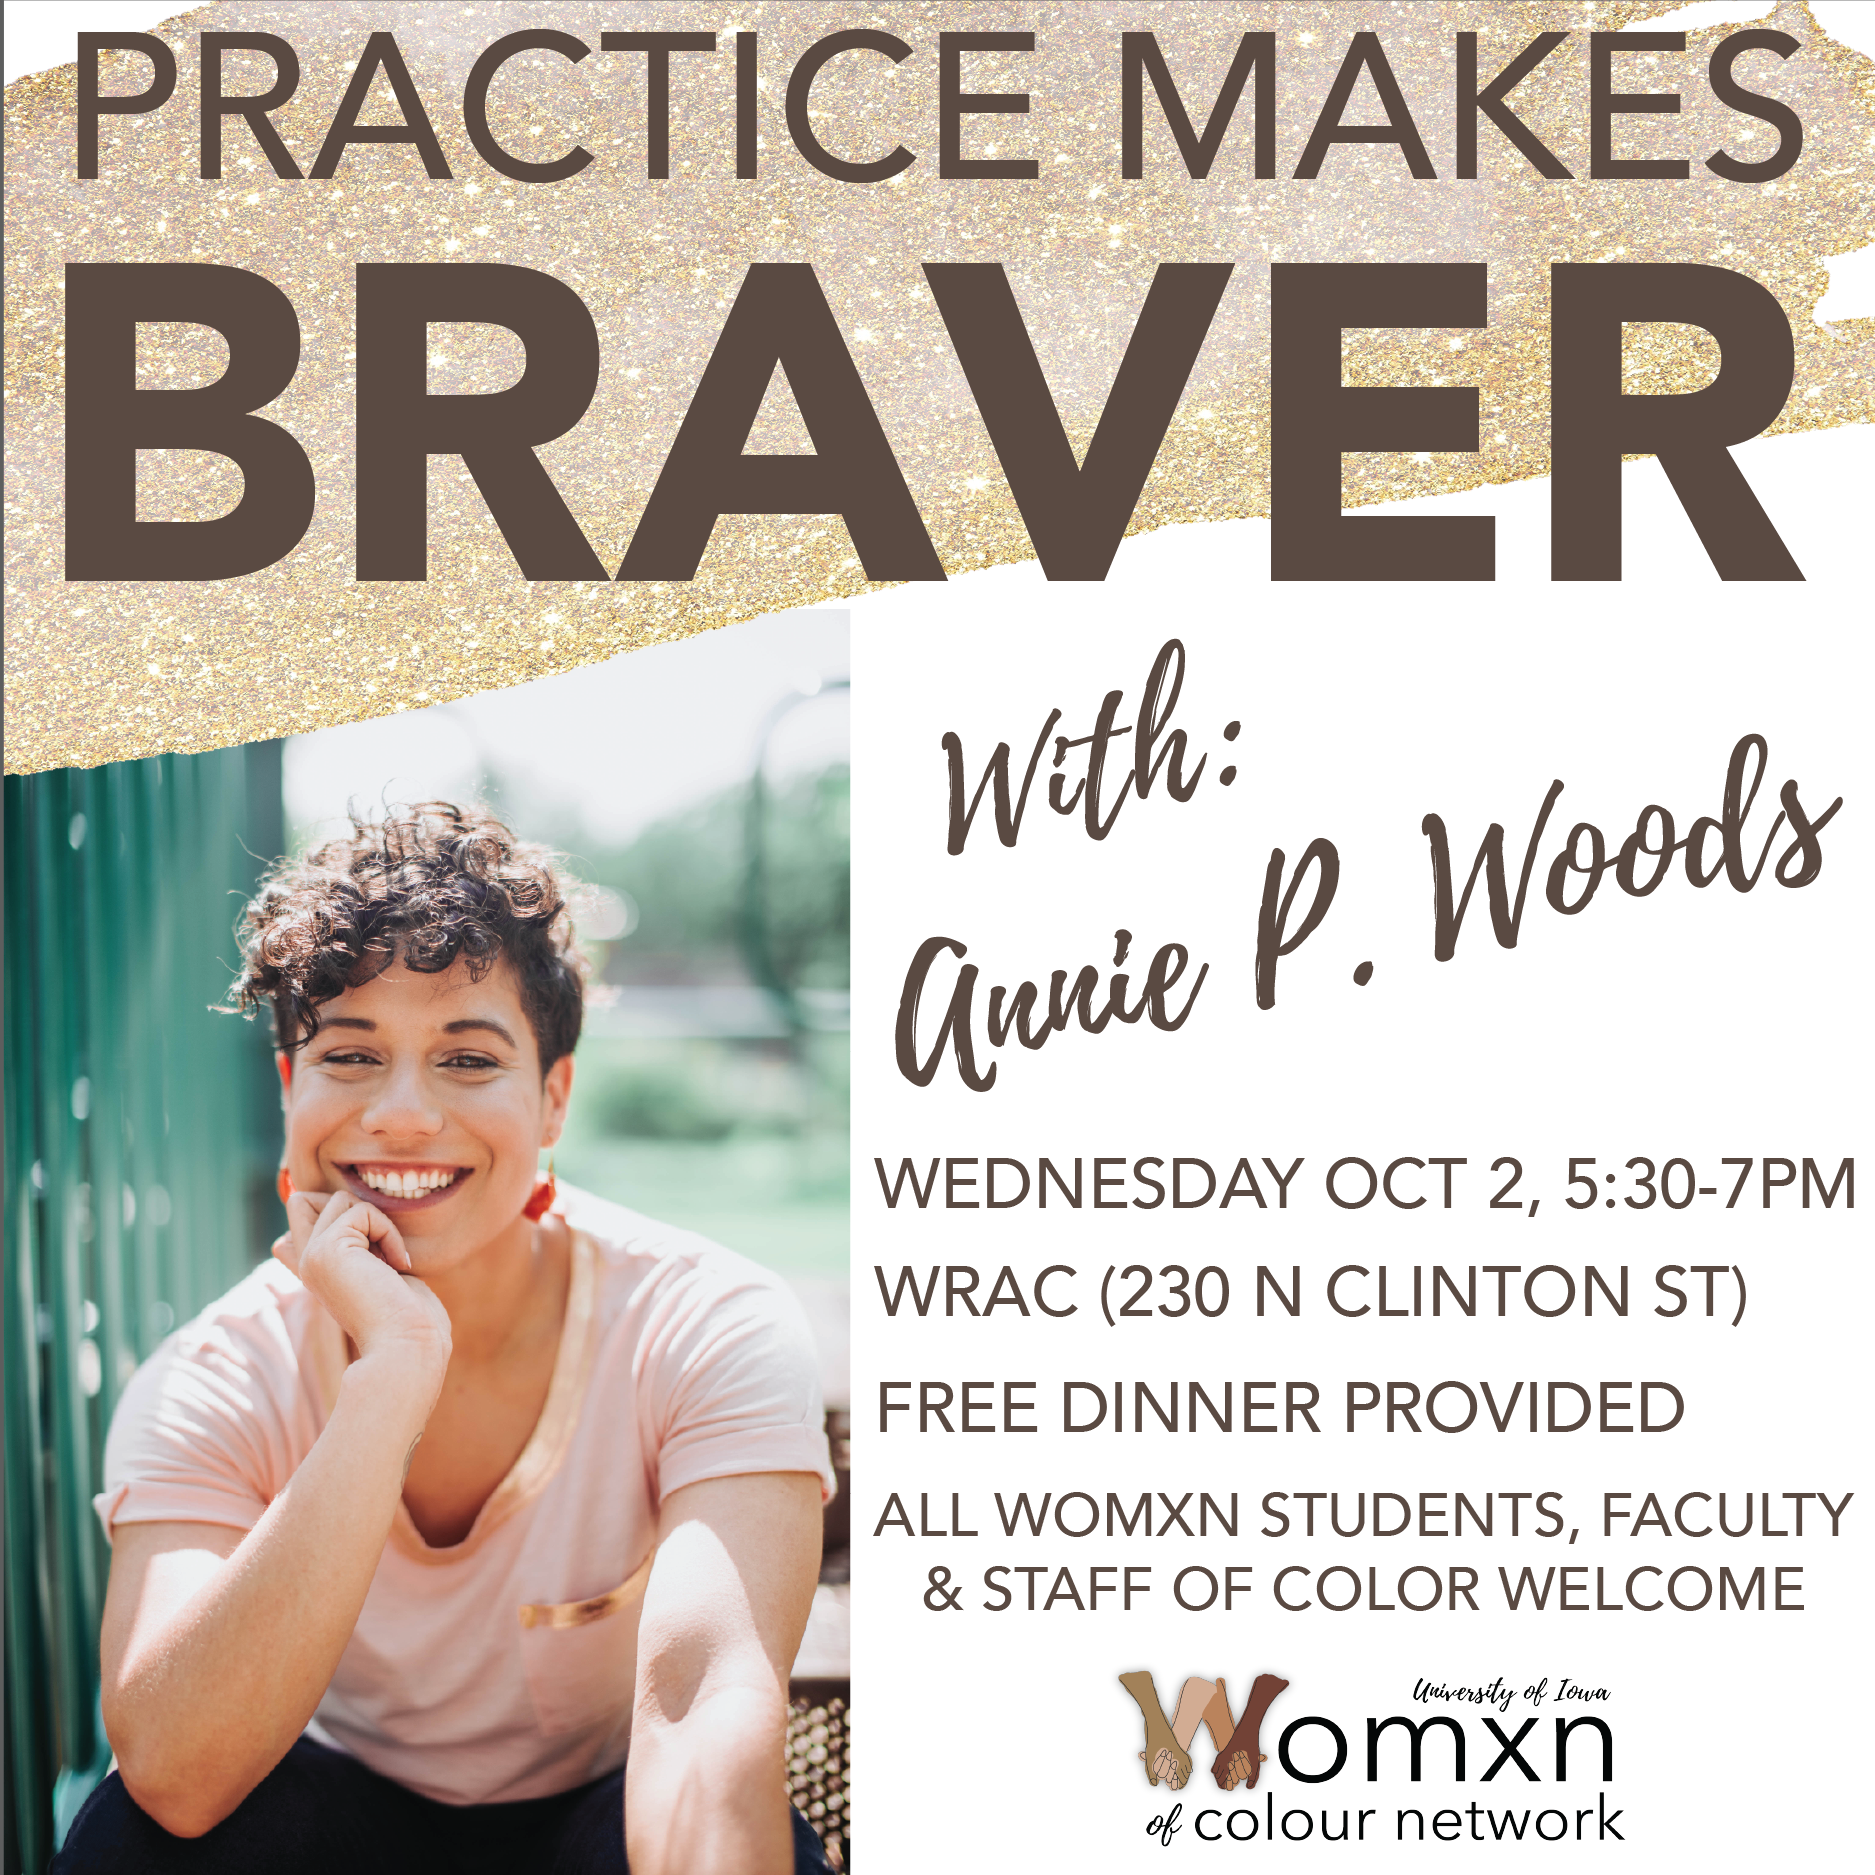 Practice makes Braver! with Annie P. Woods promotional image